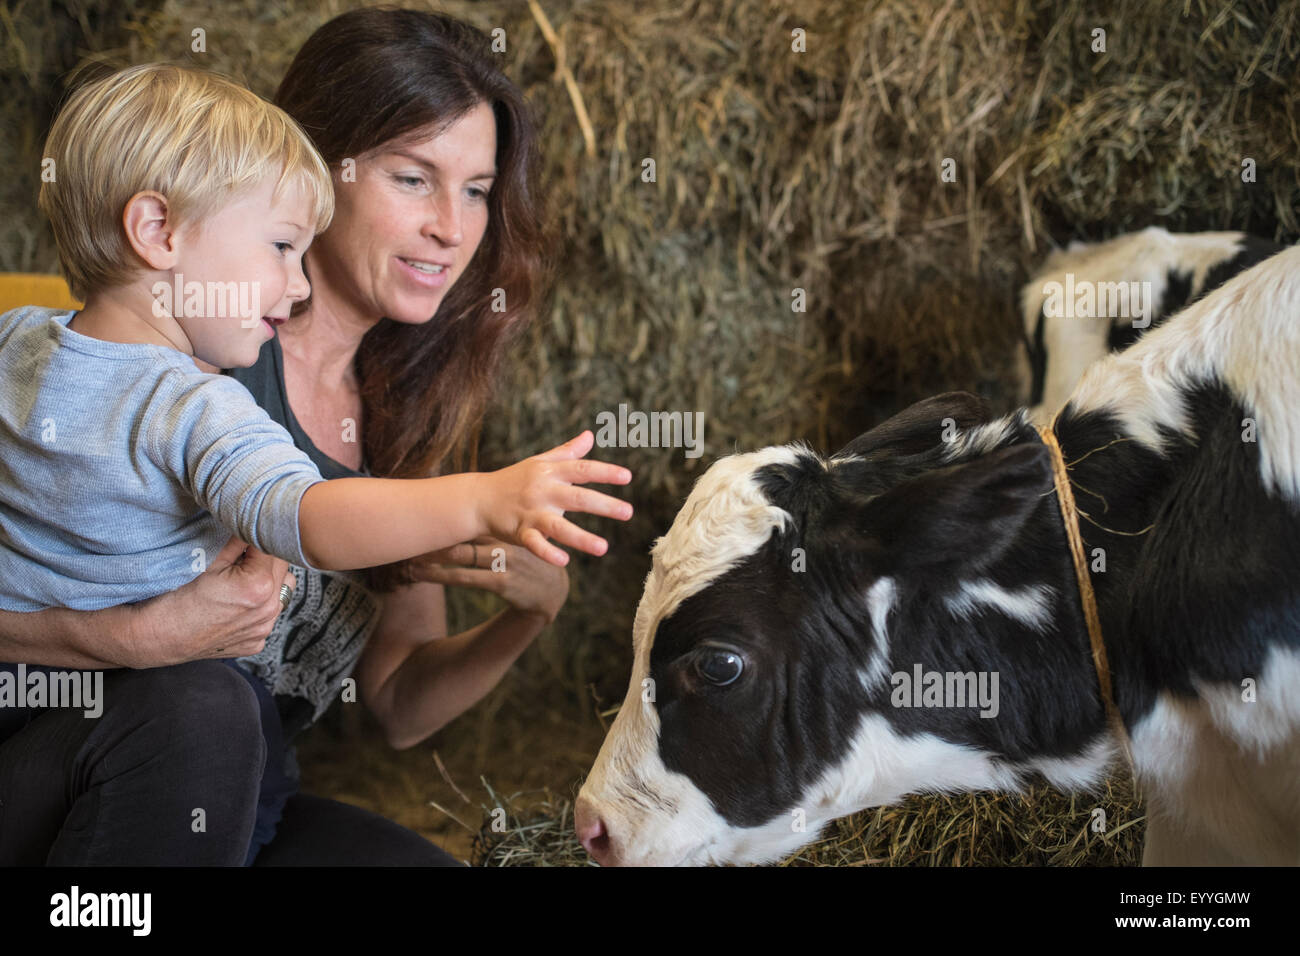 Caucasian mother and son petting cow in barn Stock Photo